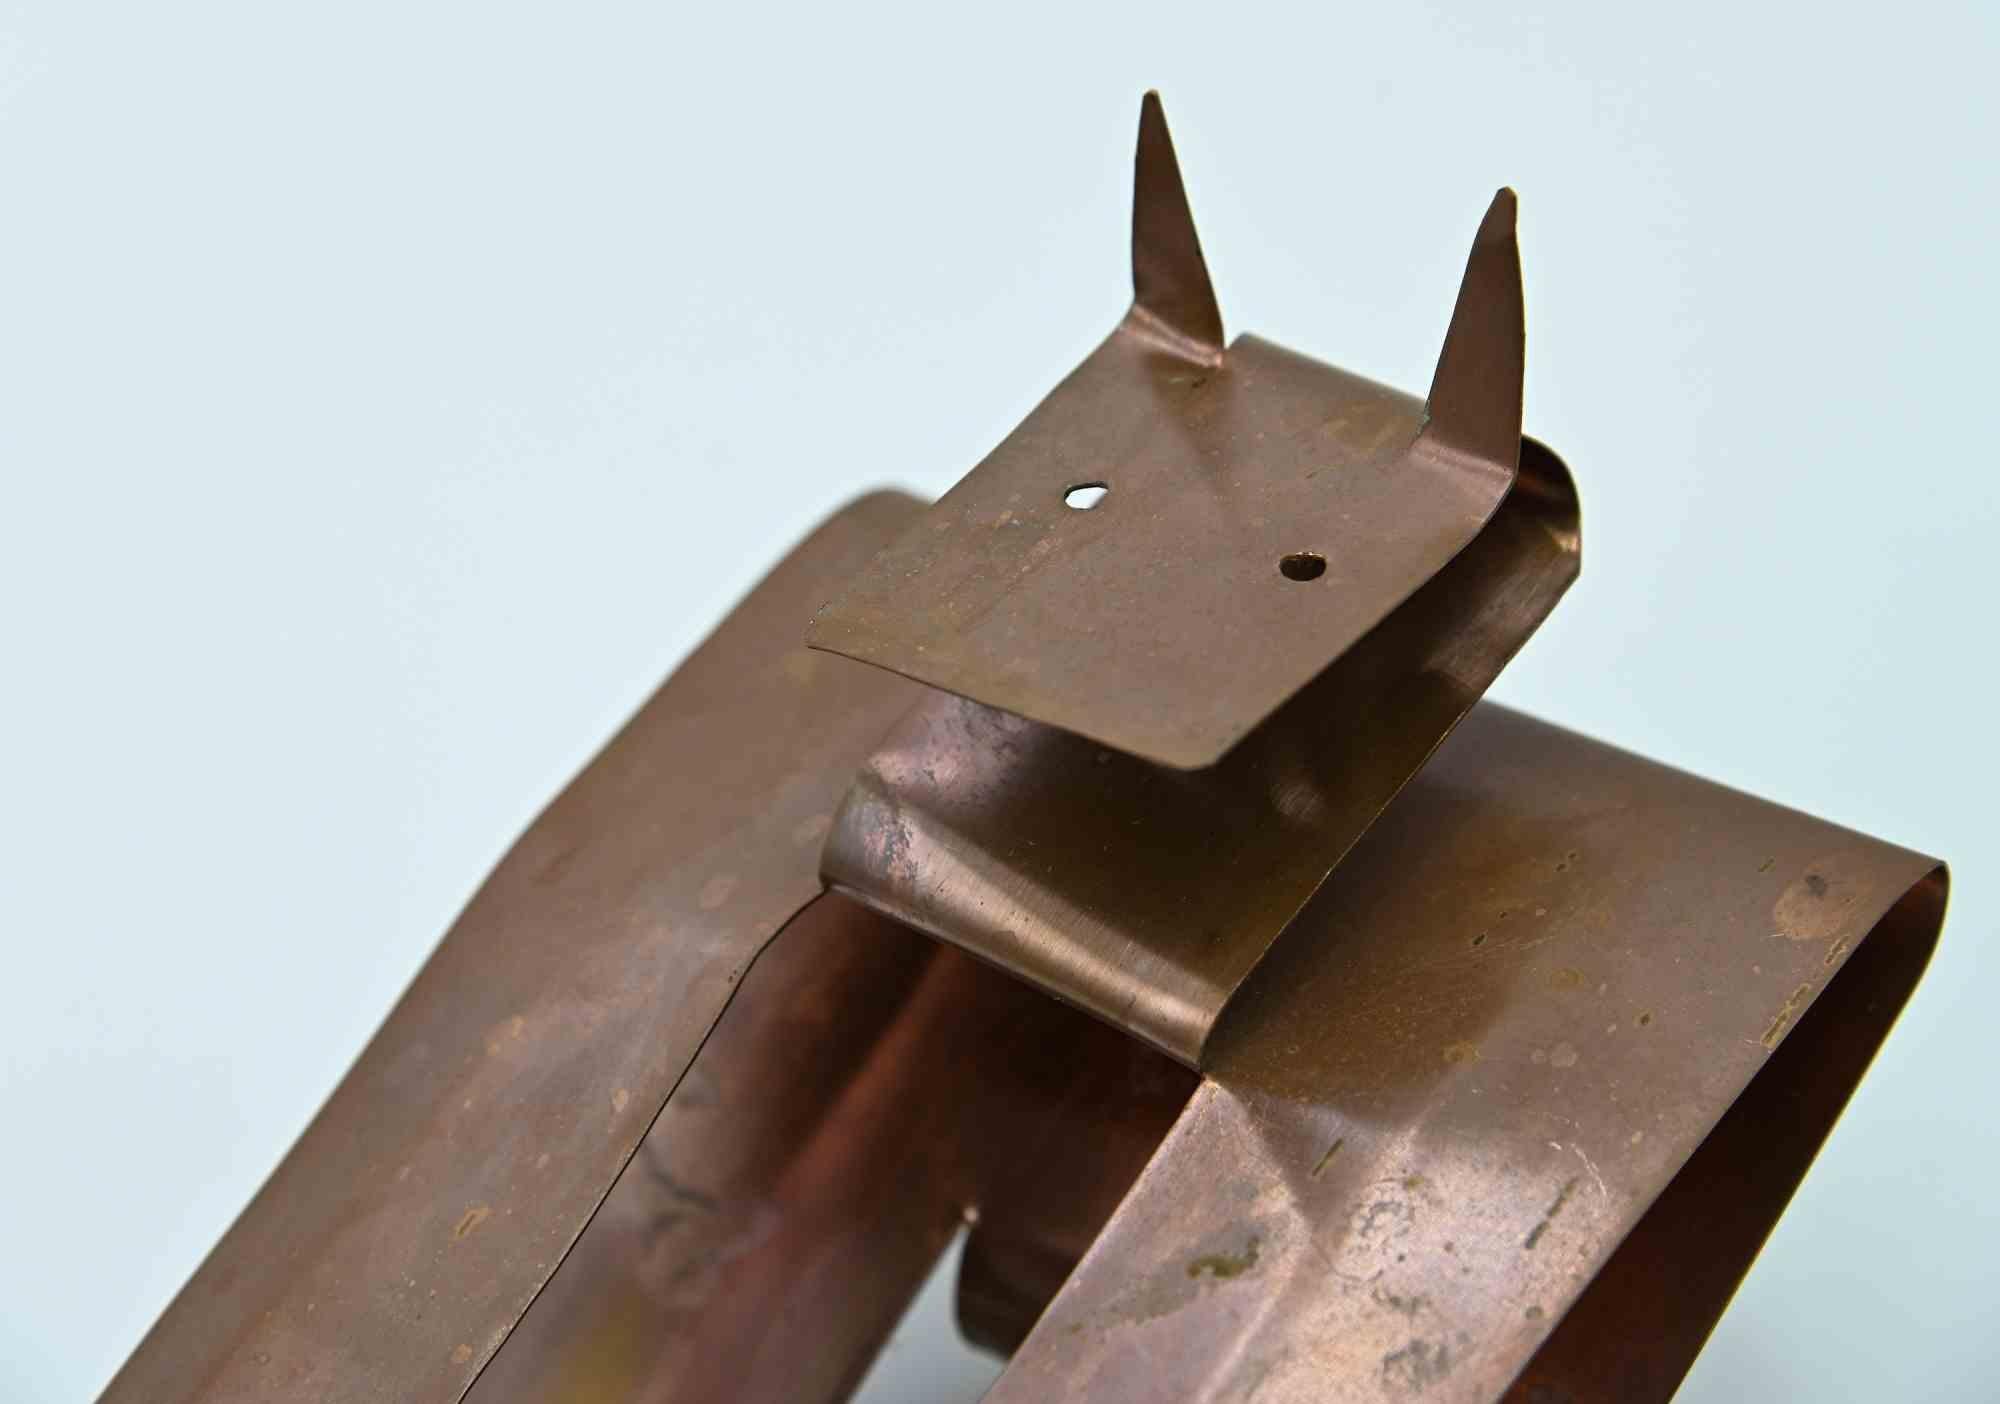 Bronze sculpture created by Tommaso Cascella and his wife.

20x12 cm.

Work signed with felt-tip pen inside the left paw.

Good conditions.

Tommaso Cascella (1890–1968) was an Italian painter, known for brightly colored landscapes and bronze